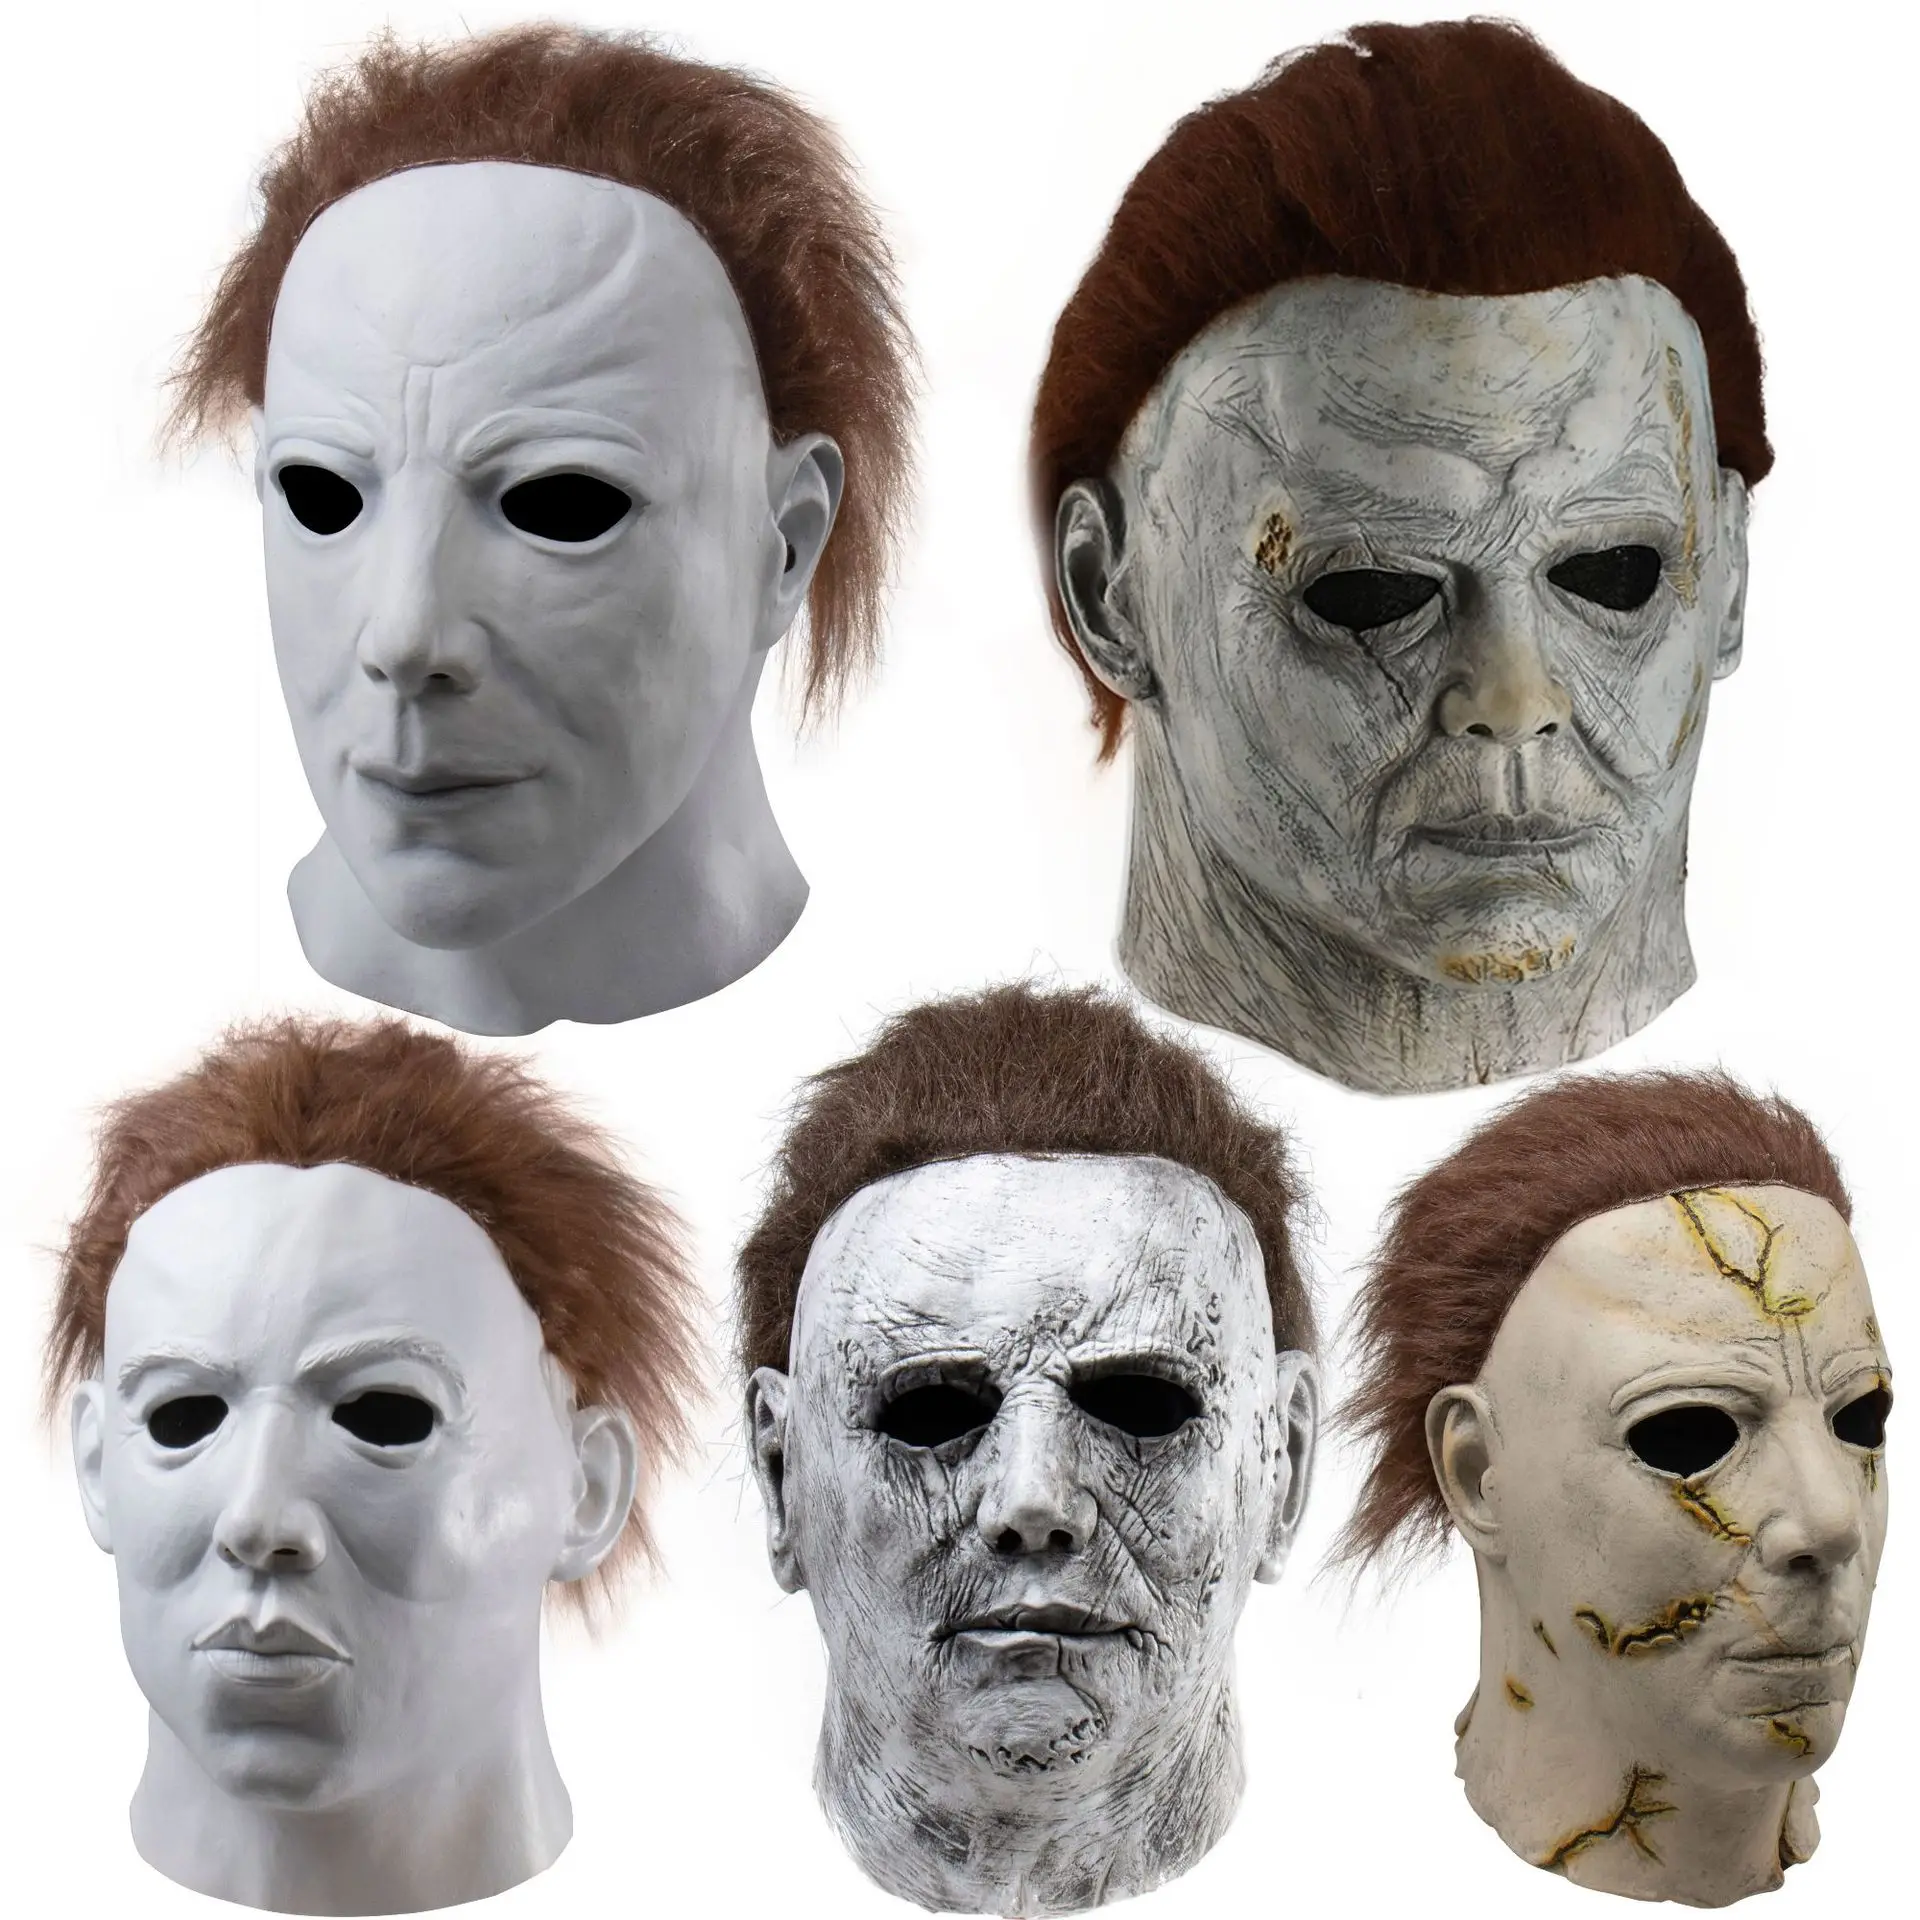 

Horror Halloween Michael Myers Mask Trick or Treat Studios Scary Cosplay Full Head Latex Mask Halloween Party Supplies